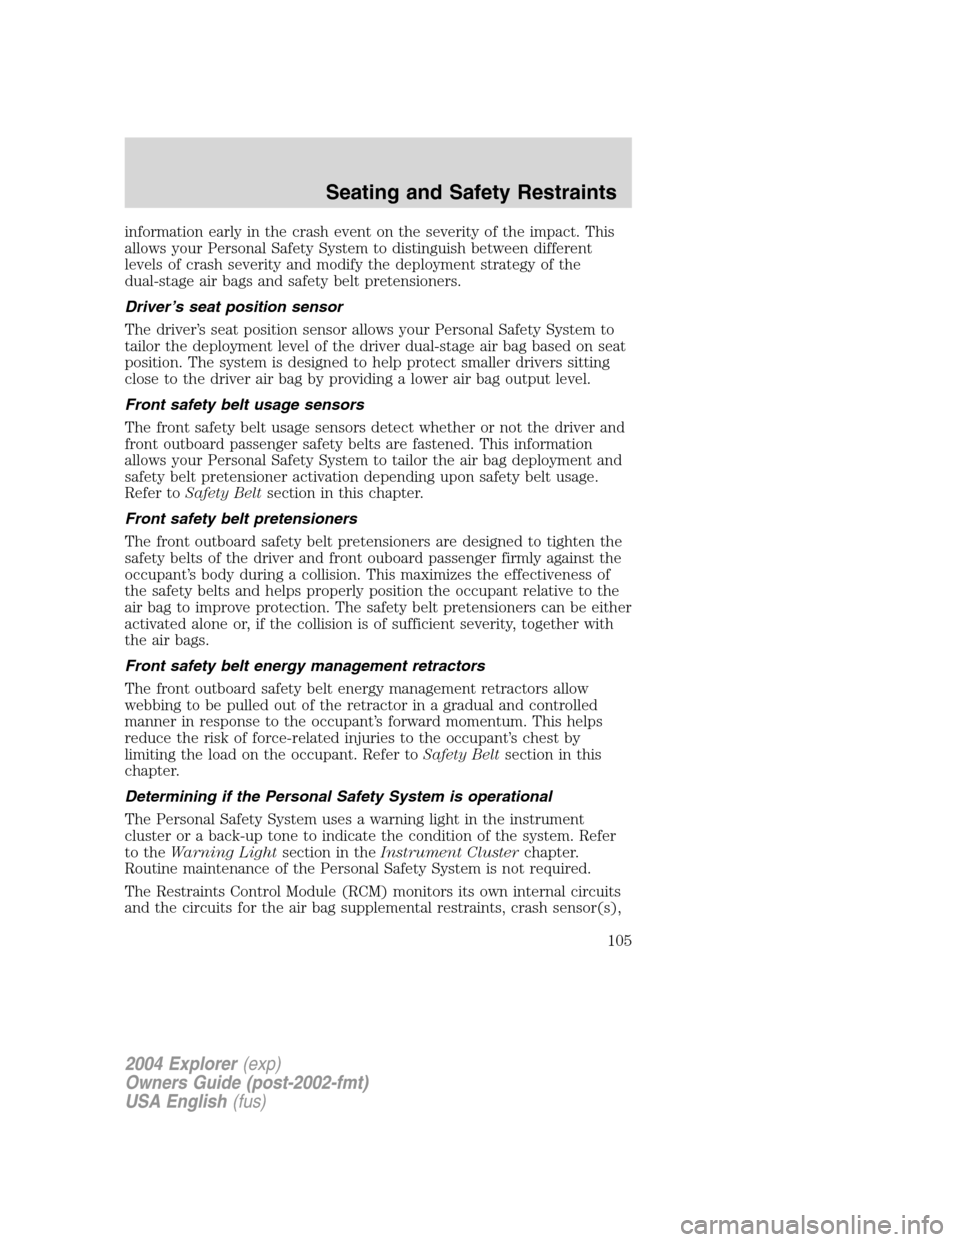 FORD EXPLORER 2004 3.G Owners Manual information early in the crash event on the severity of the impact. This
allows your Personal Safety System to distinguish between different
levels of crash severity and modify the deployment strategy